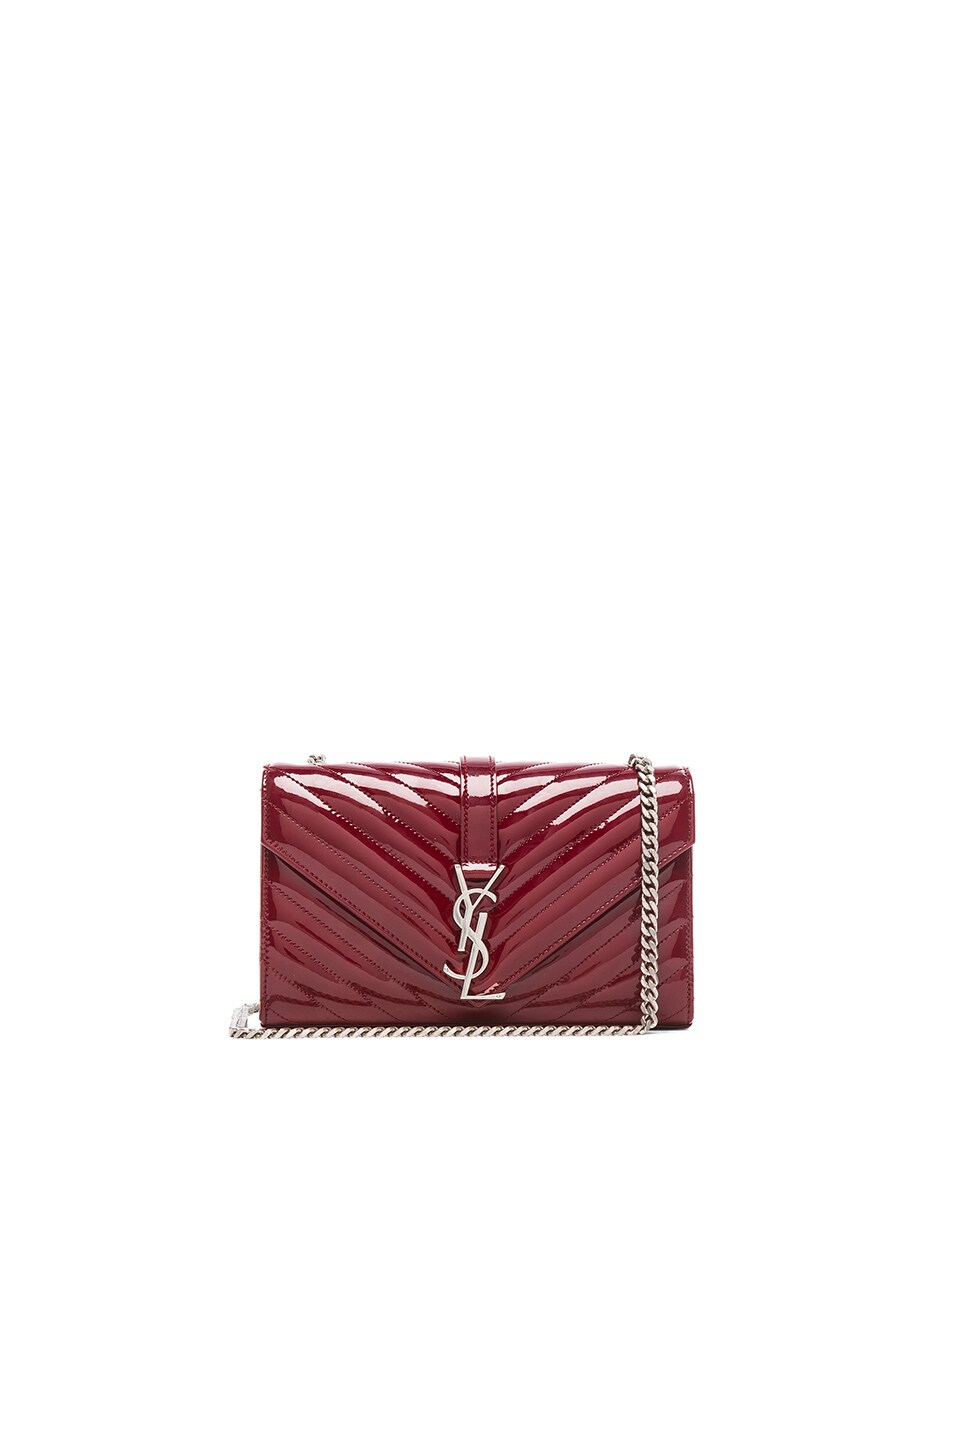 Image 1 of Saint Laurent Small Patent Monogram Chain Bag in Oxblood